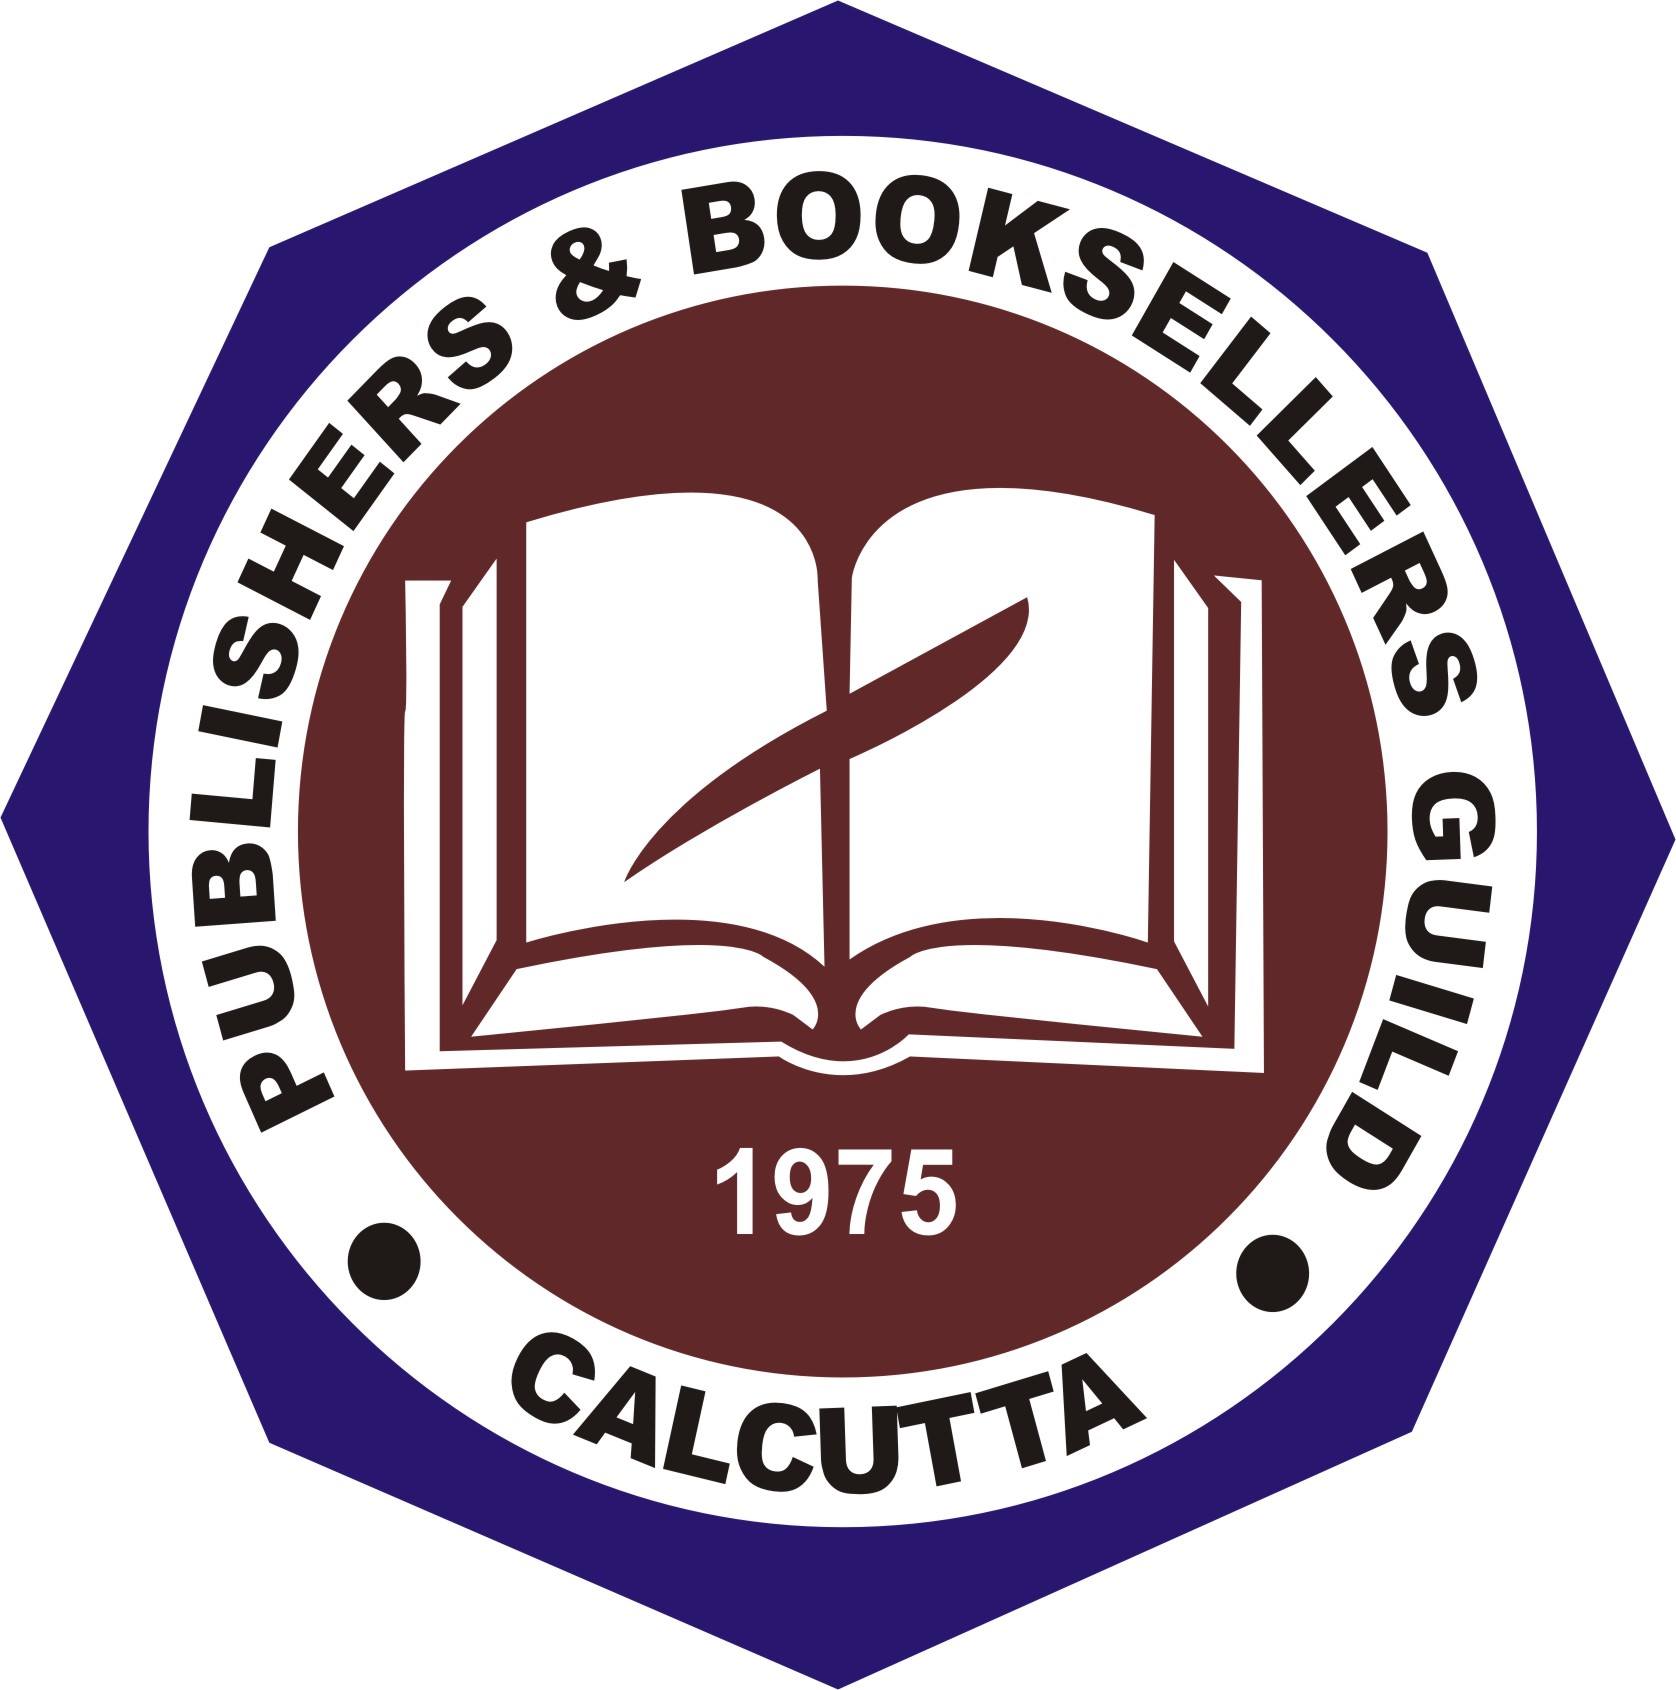 Publishers & Booksellers Guild